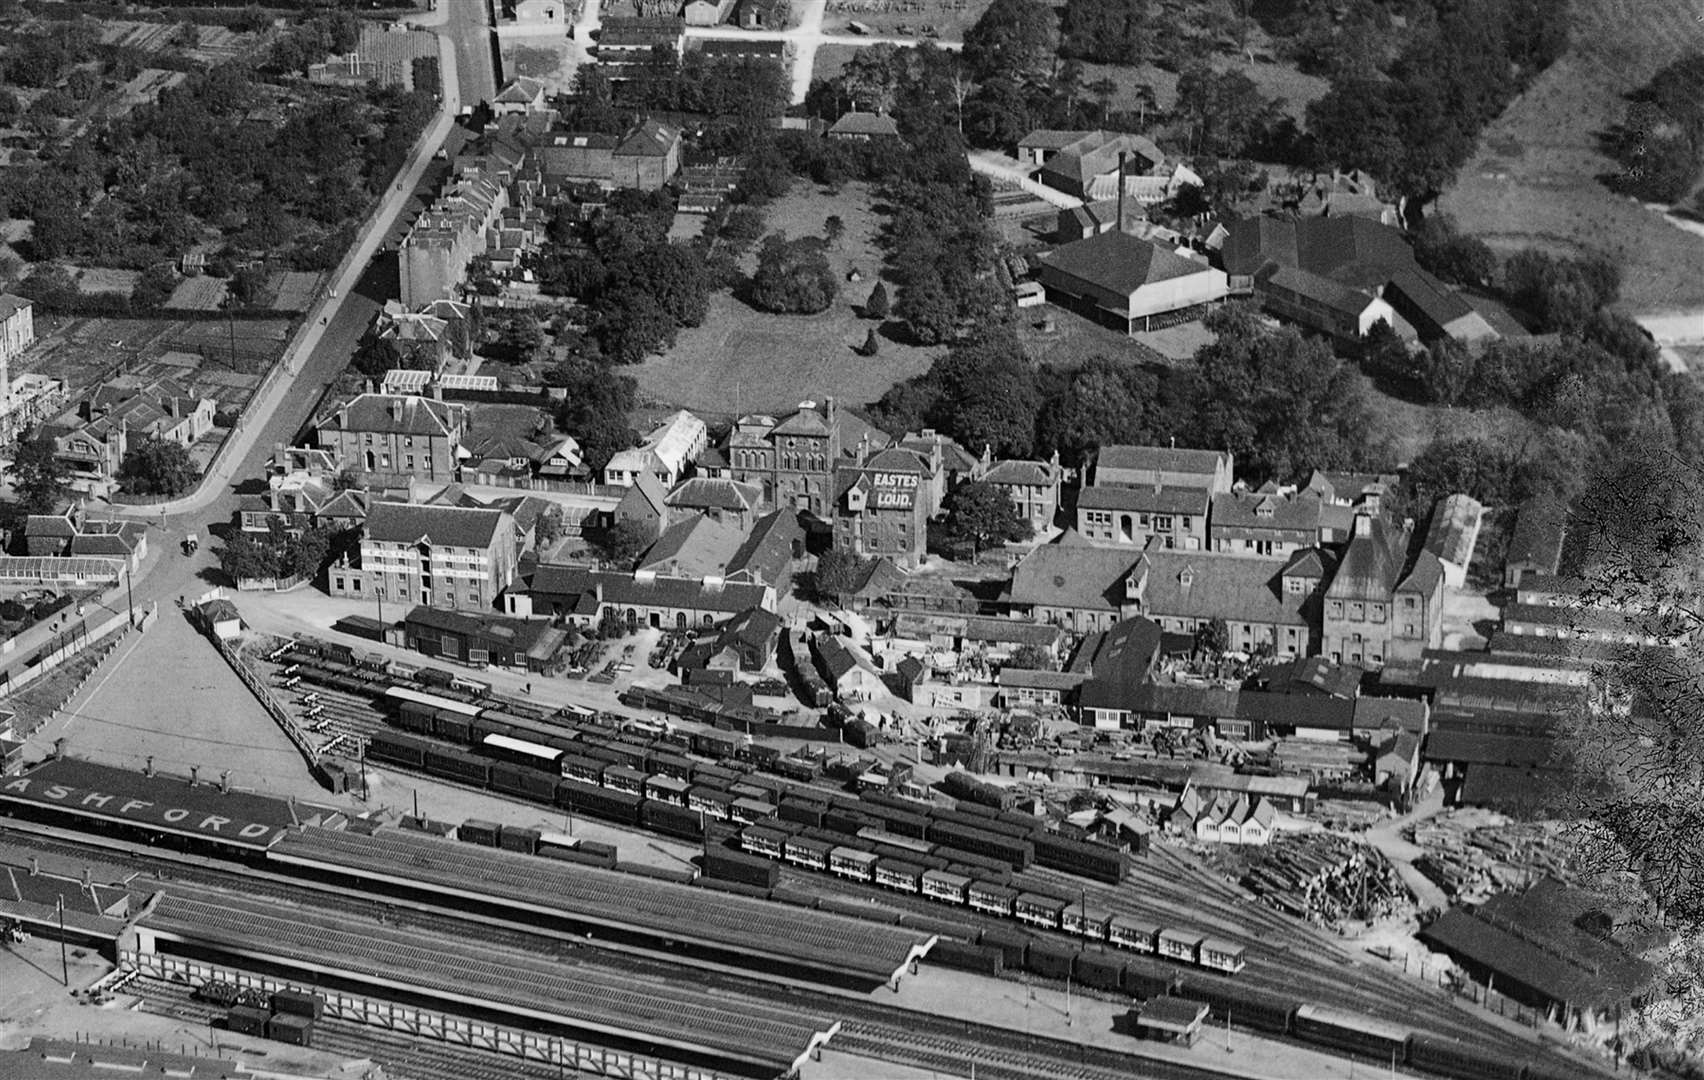 This historic shot shows the Tannery site in the top right. Picture: Historic England